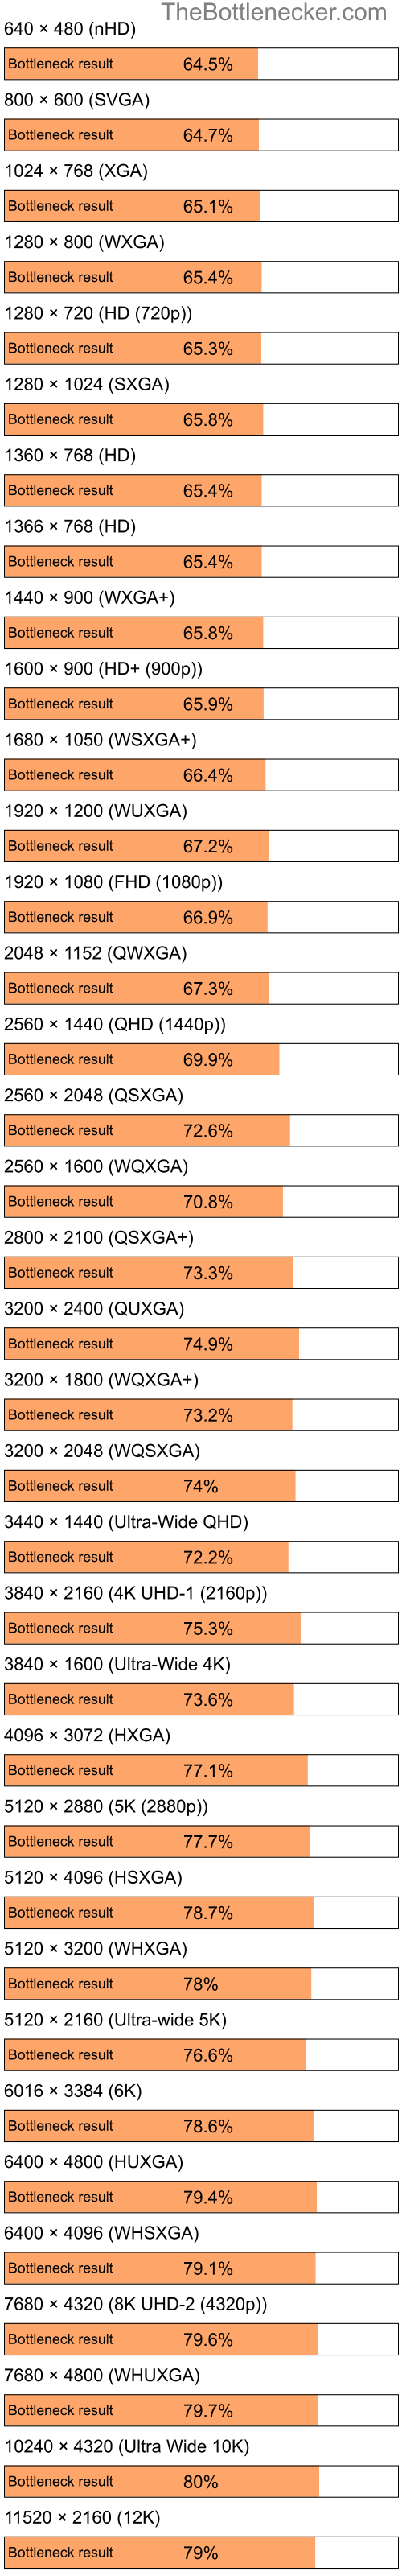 Bottleneck results by resolution for Intel Celeron M 420 and AMD Mobility Radeon HD 3450 in General Tasks